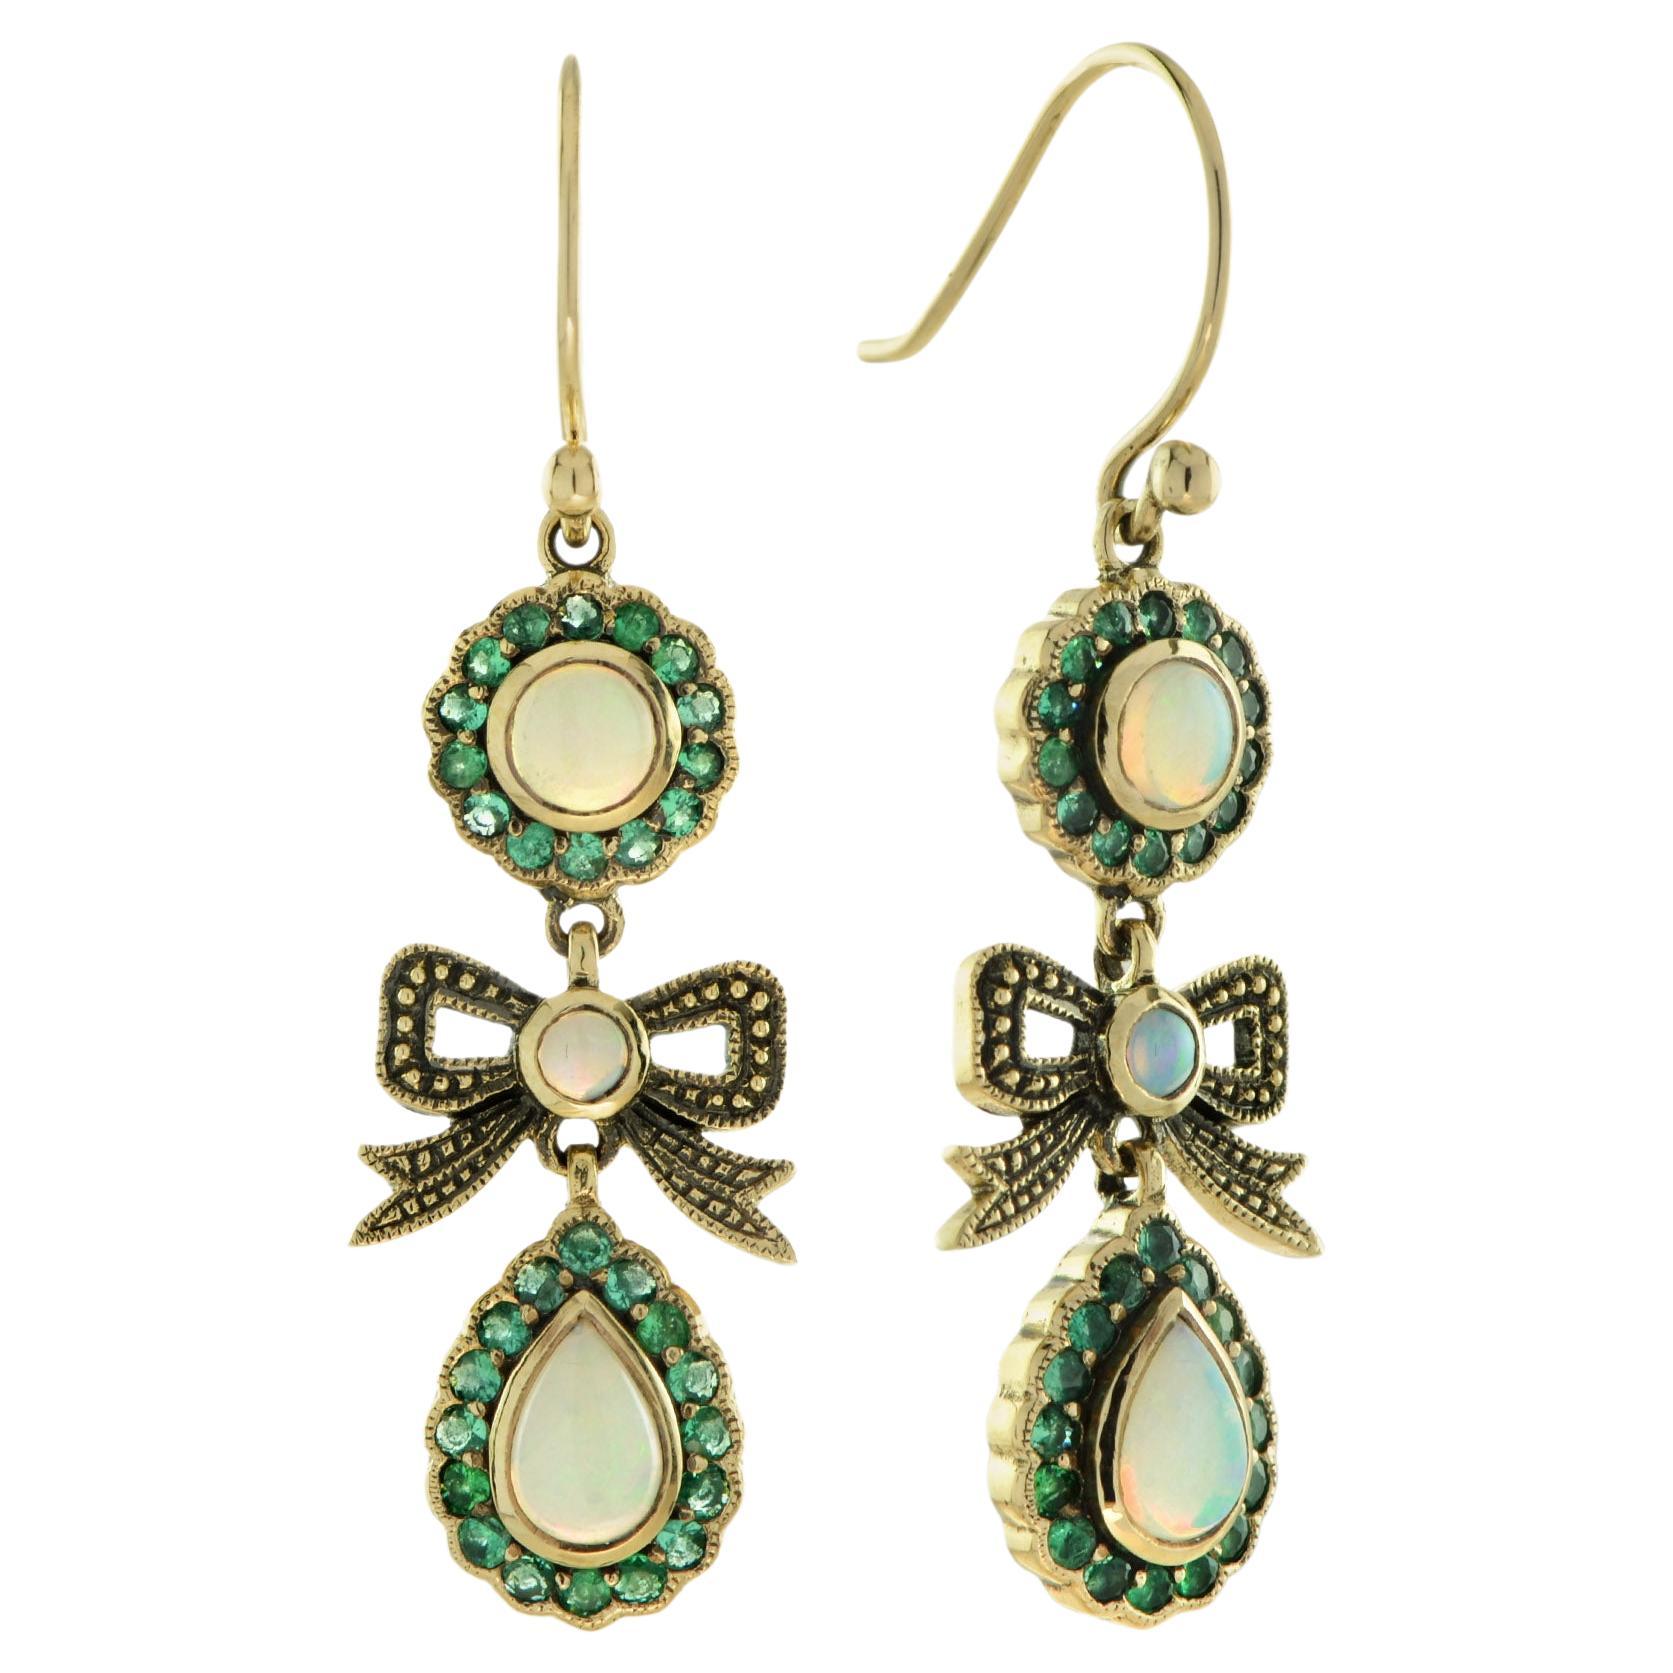 Opal and Emerald Accent Vintage Style Bow Drop Earrings in 9k Yellow Gold